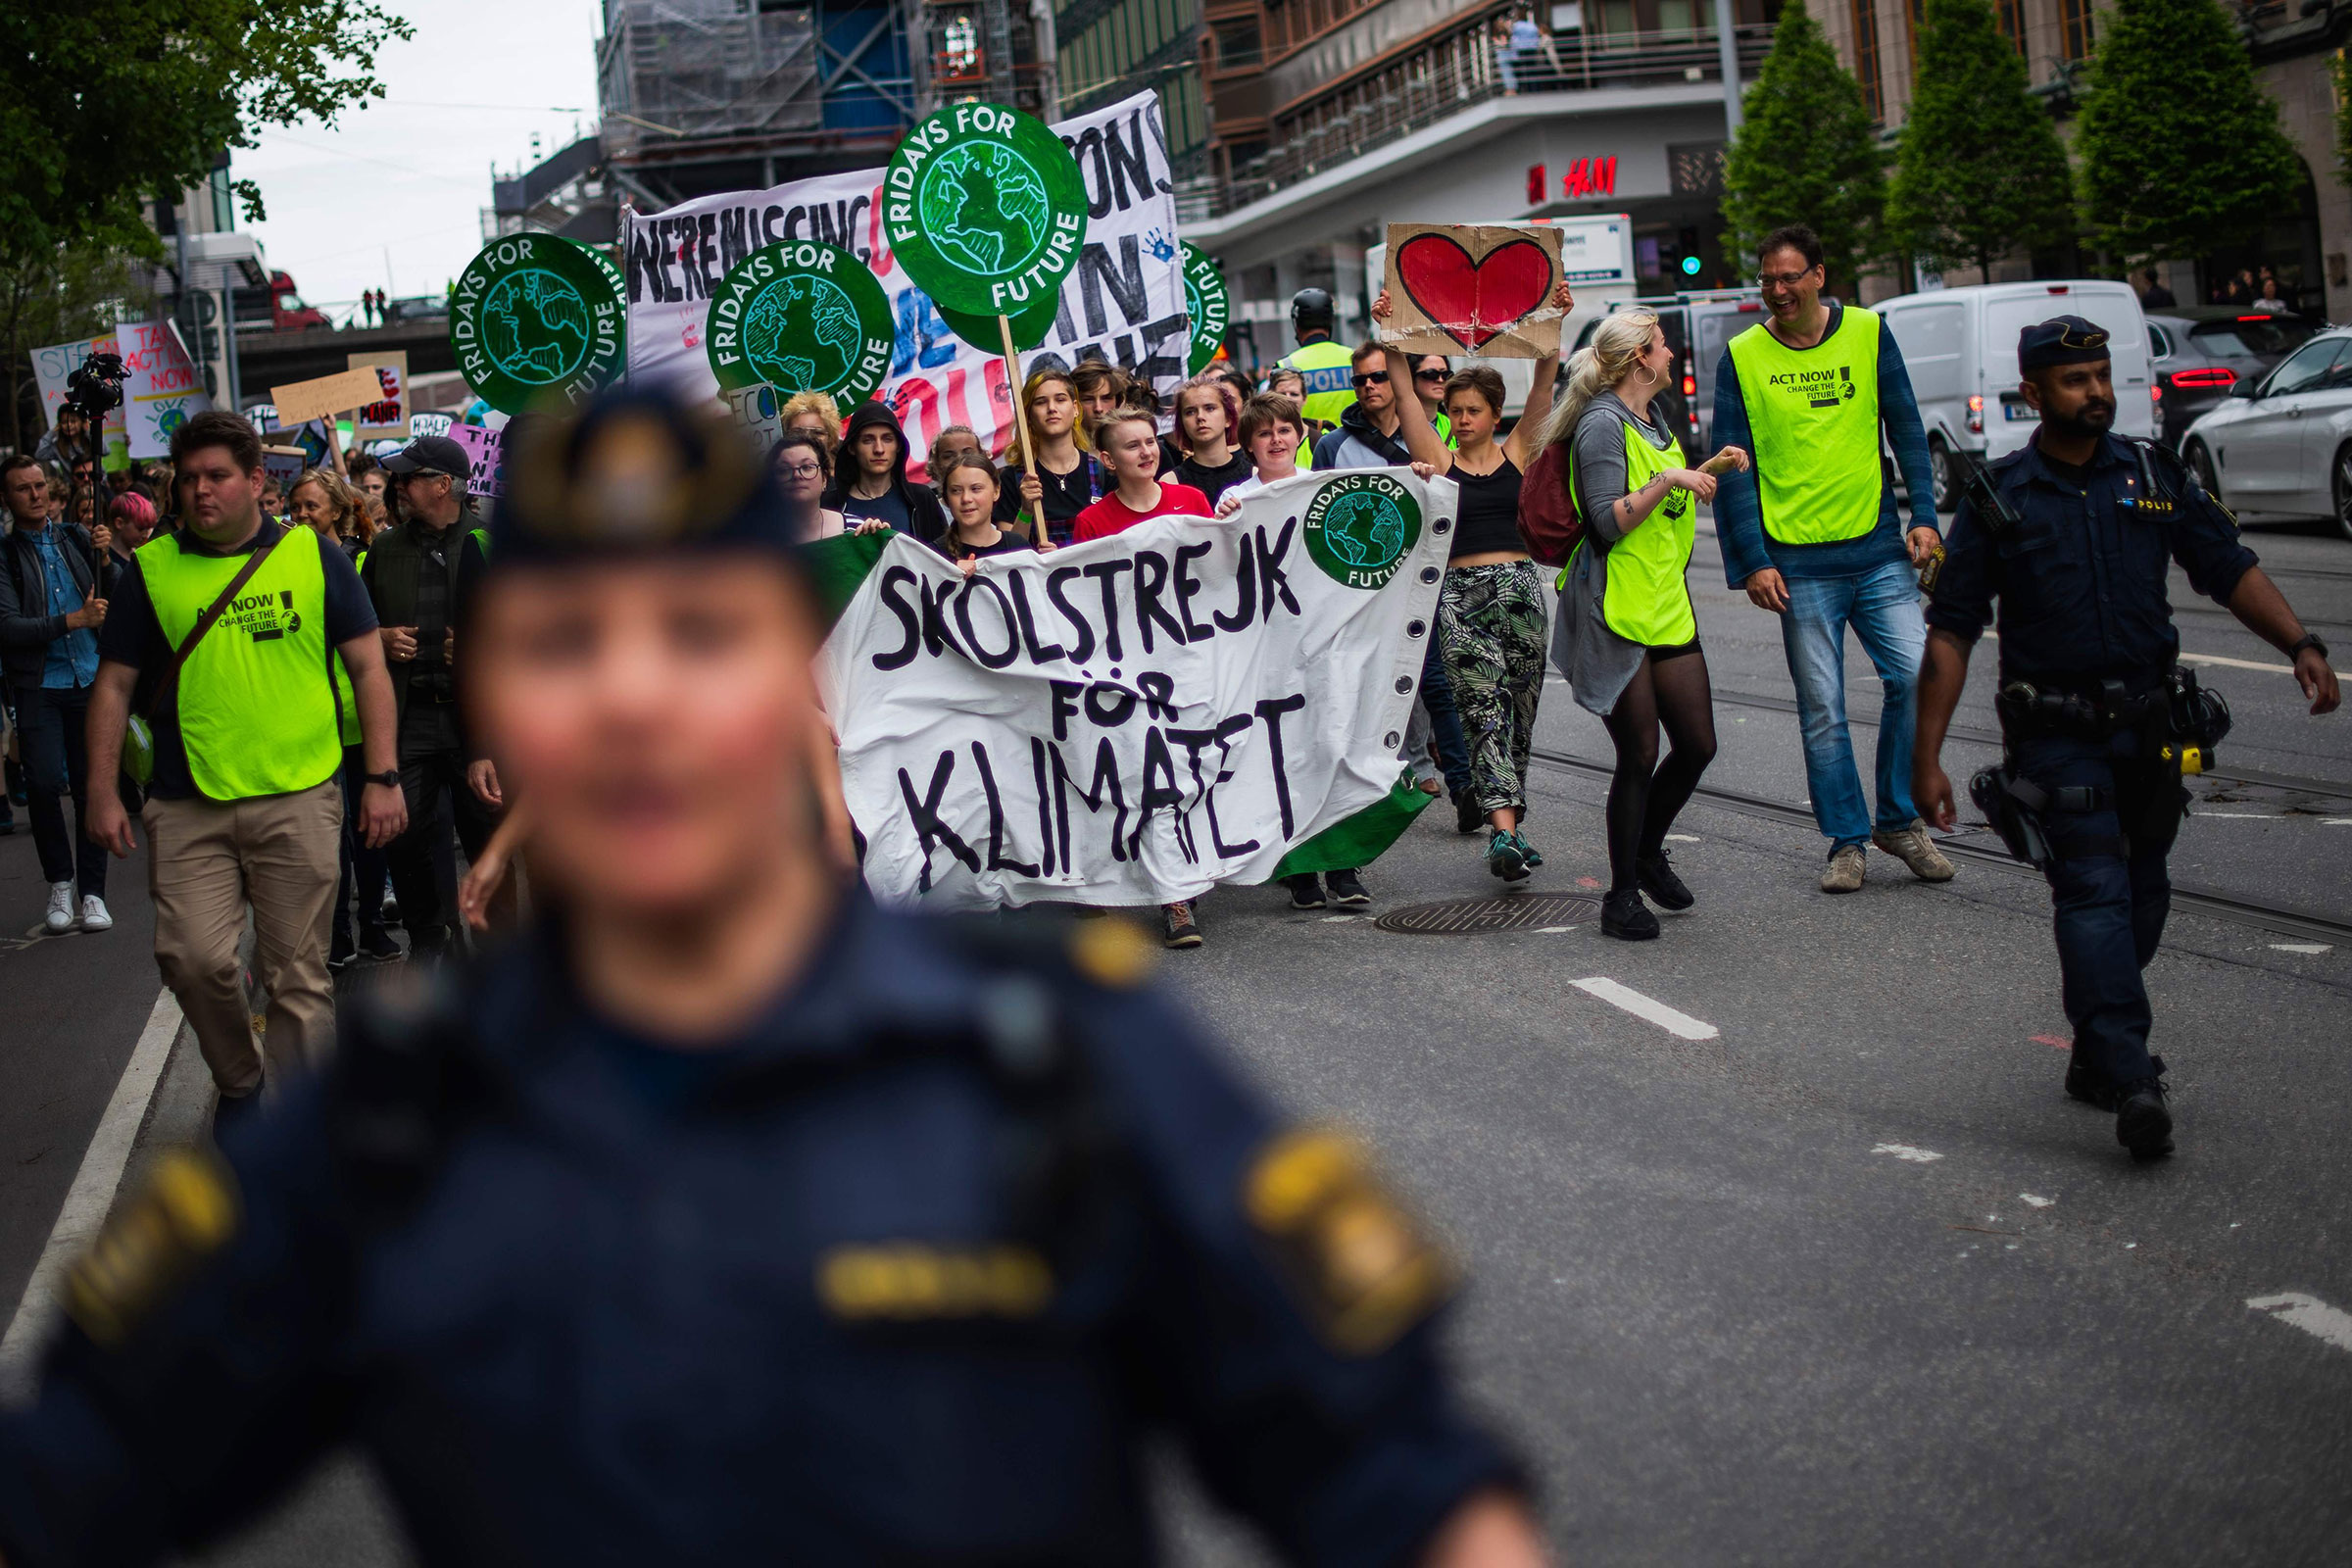 Greta Thunberg (2ndL behind the banner), the 16-year-old Swedish climate activist, marches during the 